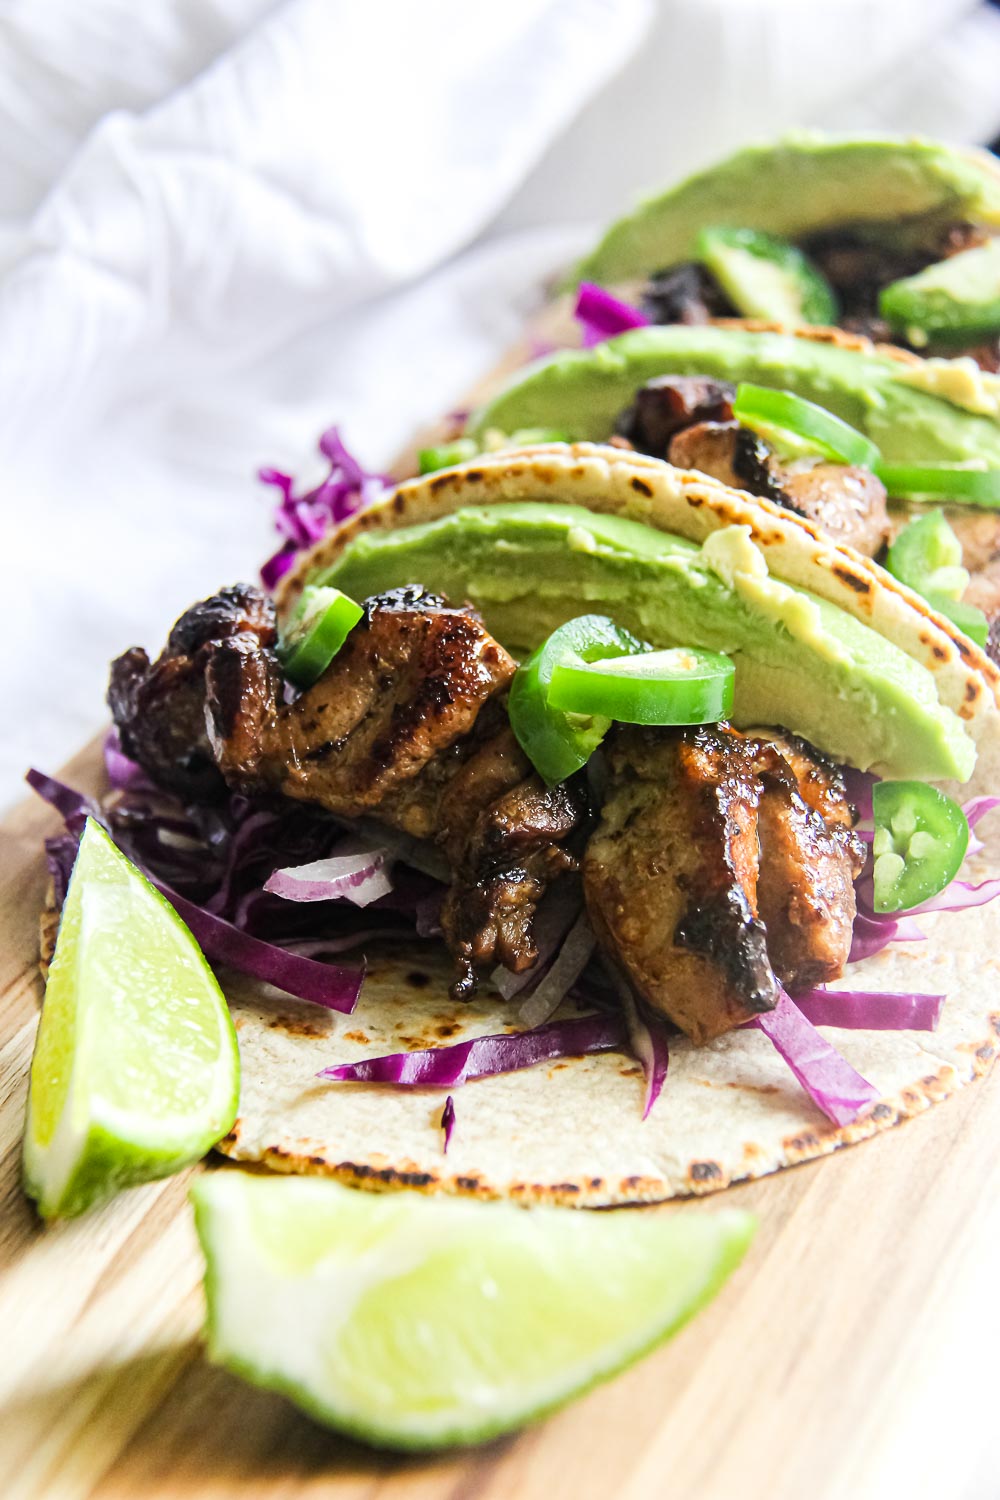 Kick your Taco Tuesday or Cinco de Mayo up a notch with these pineapple lime chicken tacos that are hearty and full of flavors!